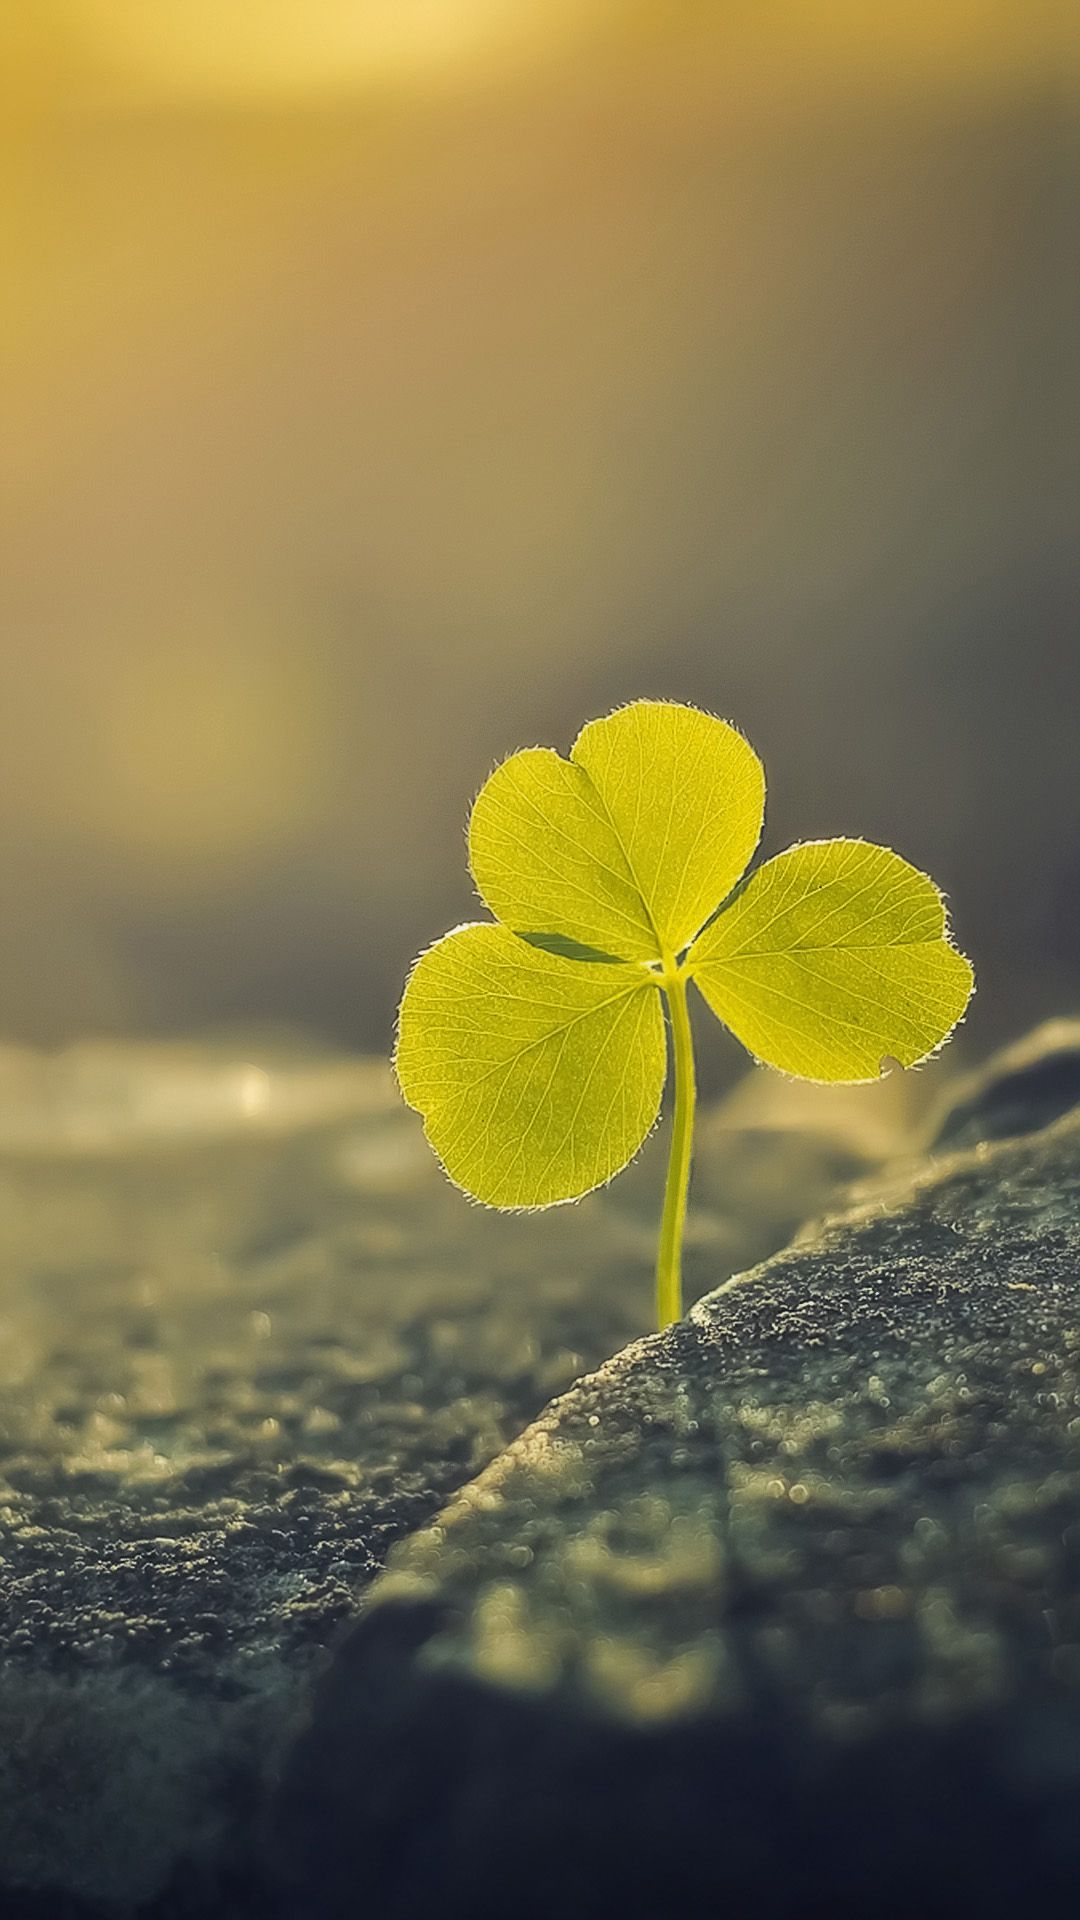 Three Leaf Clover Sunlight Macro Android Wallpaper free download